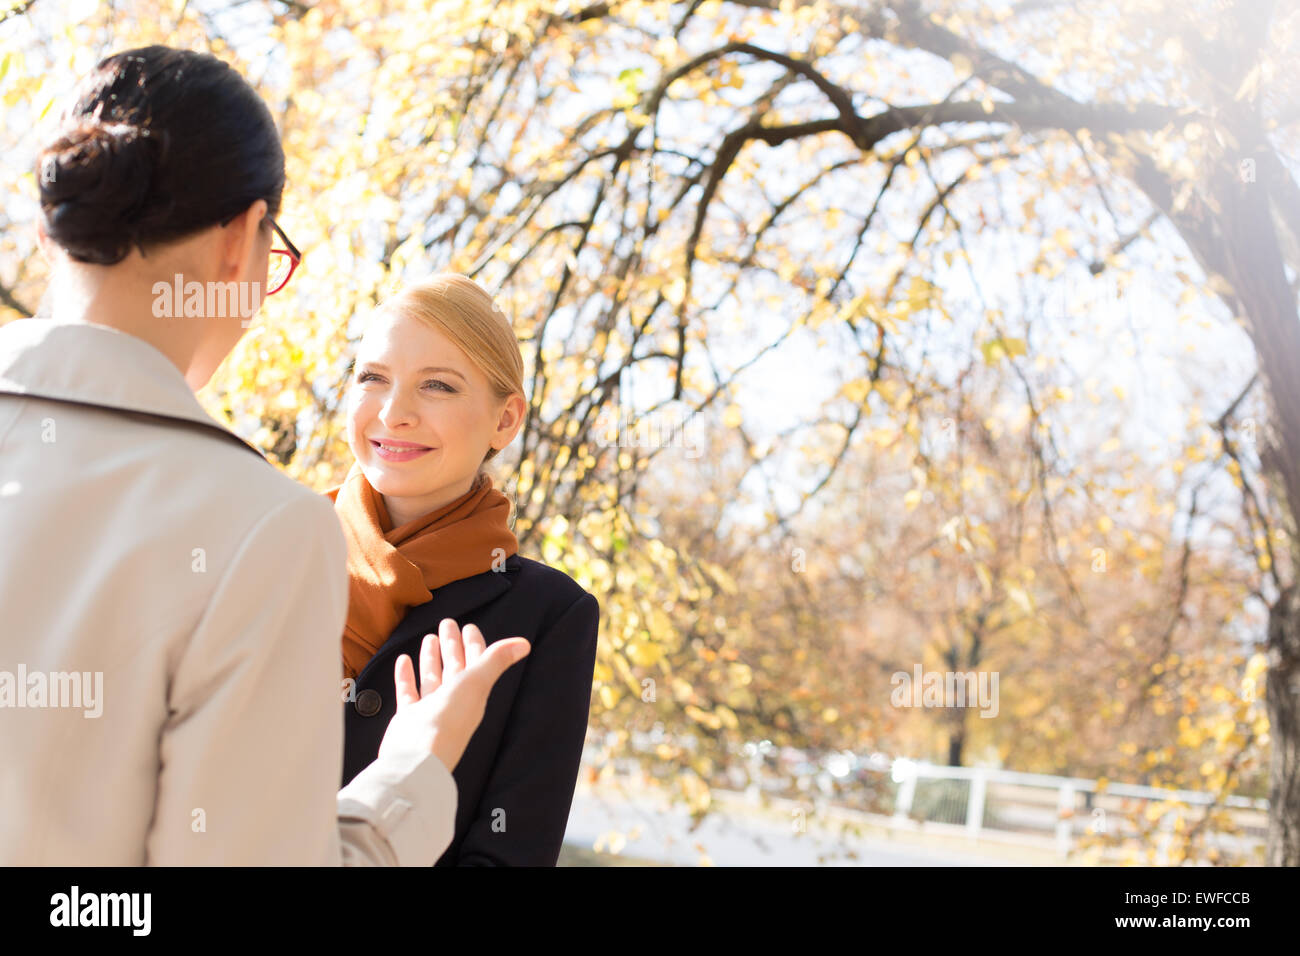 Businesswomen conversing at park on sunny day Stock Photo